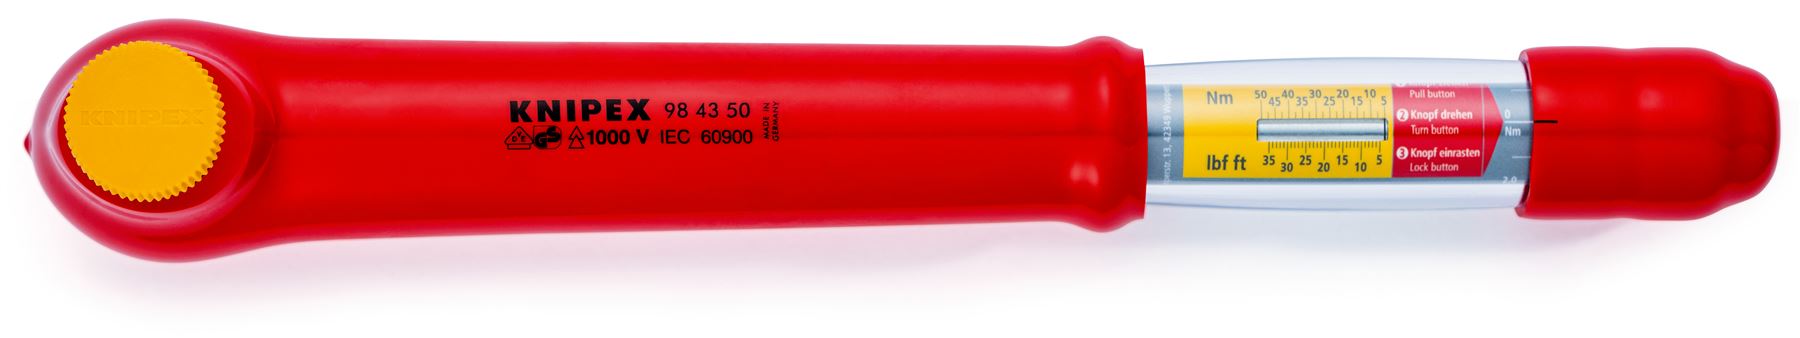 KNIPEX Torque Wrench VDE Insulated 1/2" Drive Reversible 5-50Nm 385mm 98 43 50